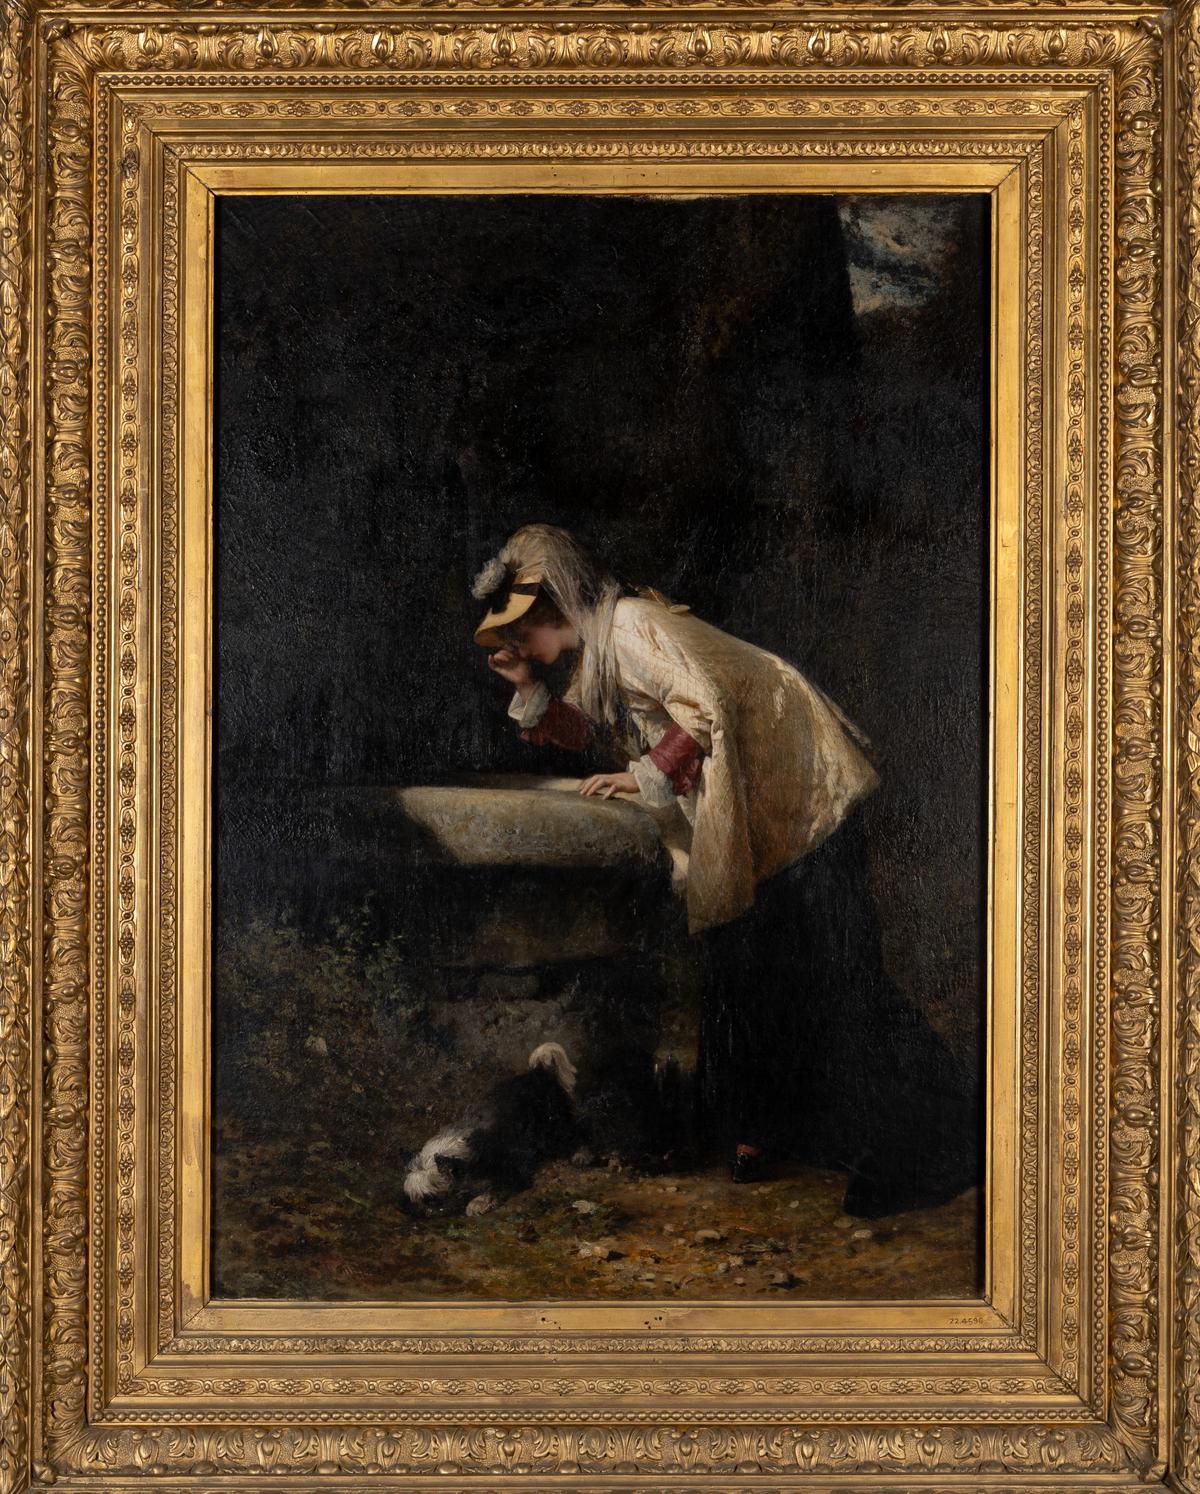 ‘Peeping in the well’ is a 19th century painting by François-Claudius Compte-Calix, a French painter of genre subjects.